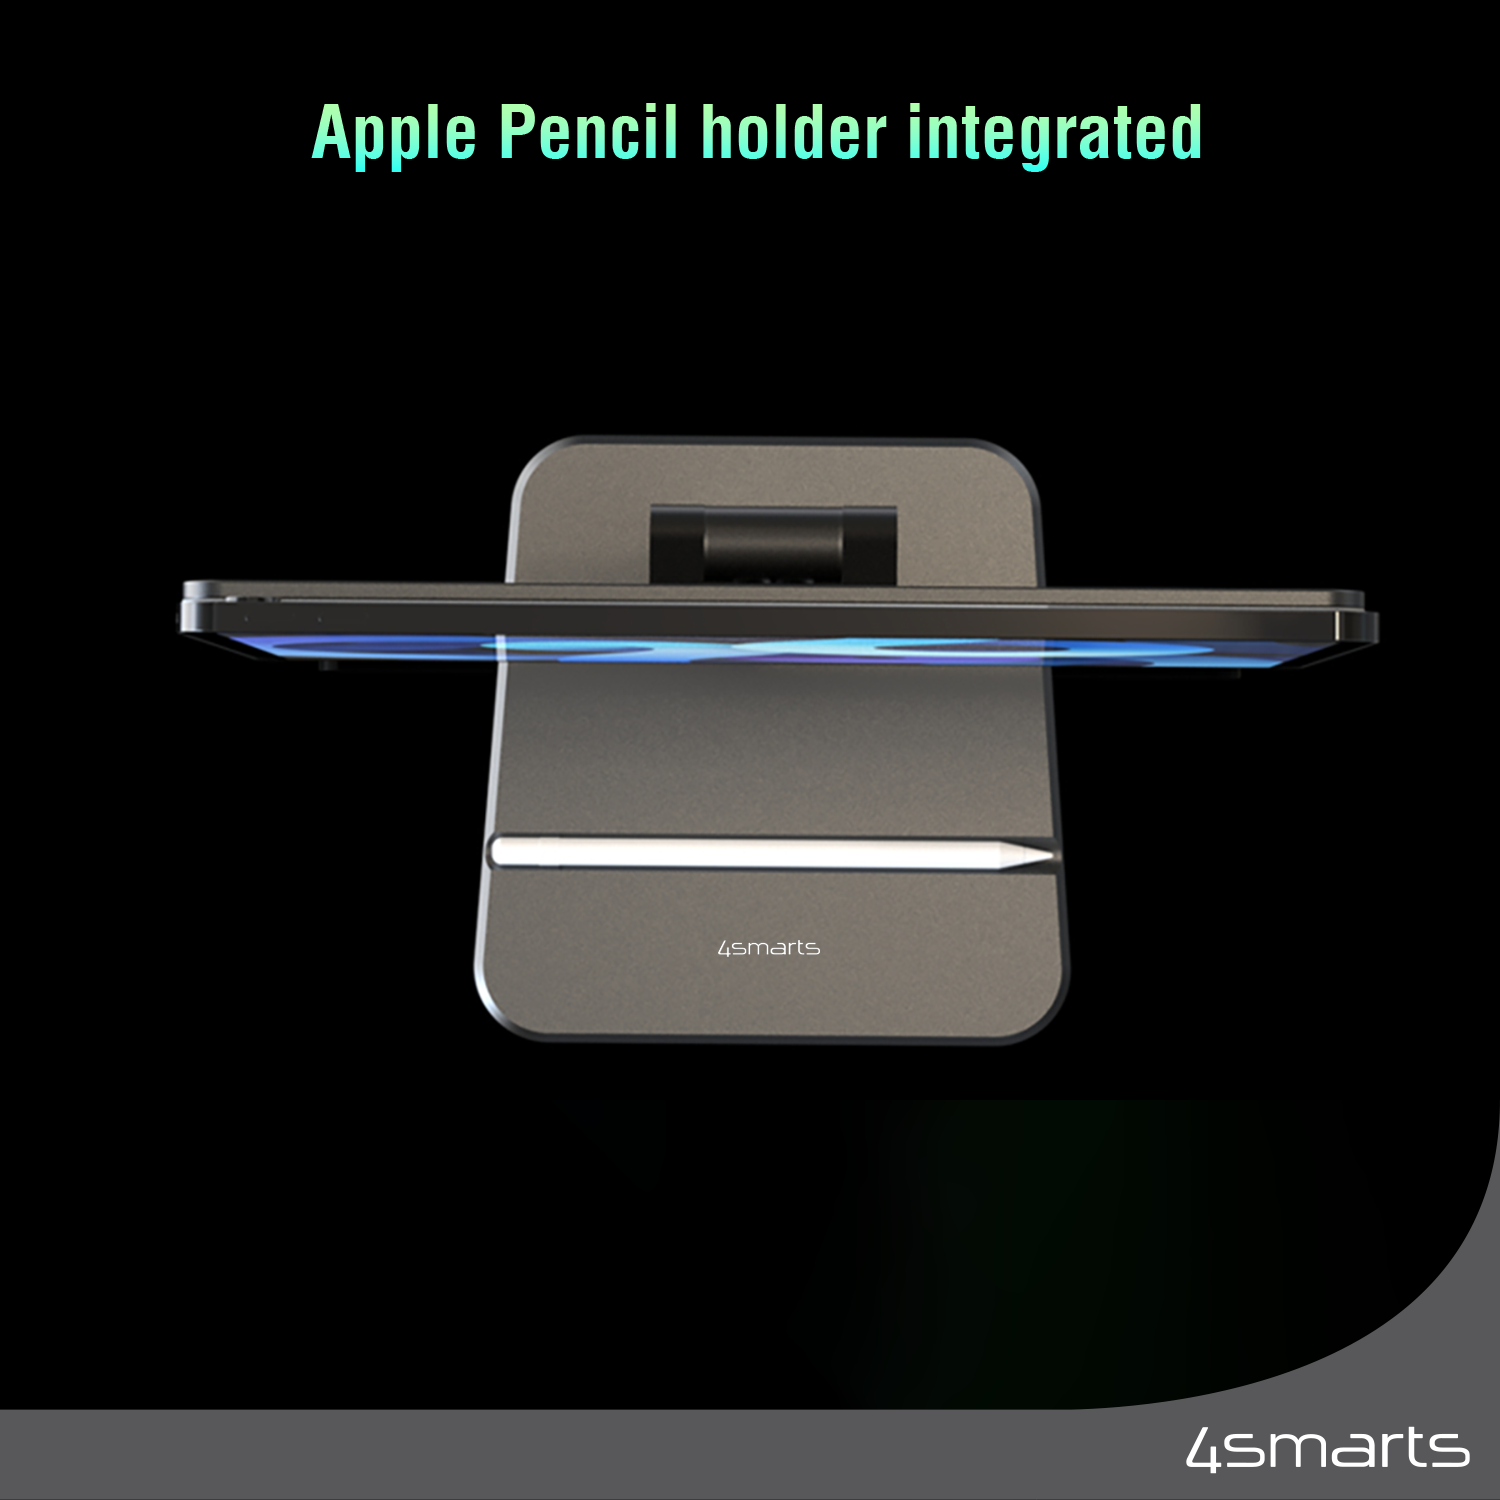 4smarts Tablet Holder for Apple iPad Pro 11 has an integrated Apple Pencil holder.